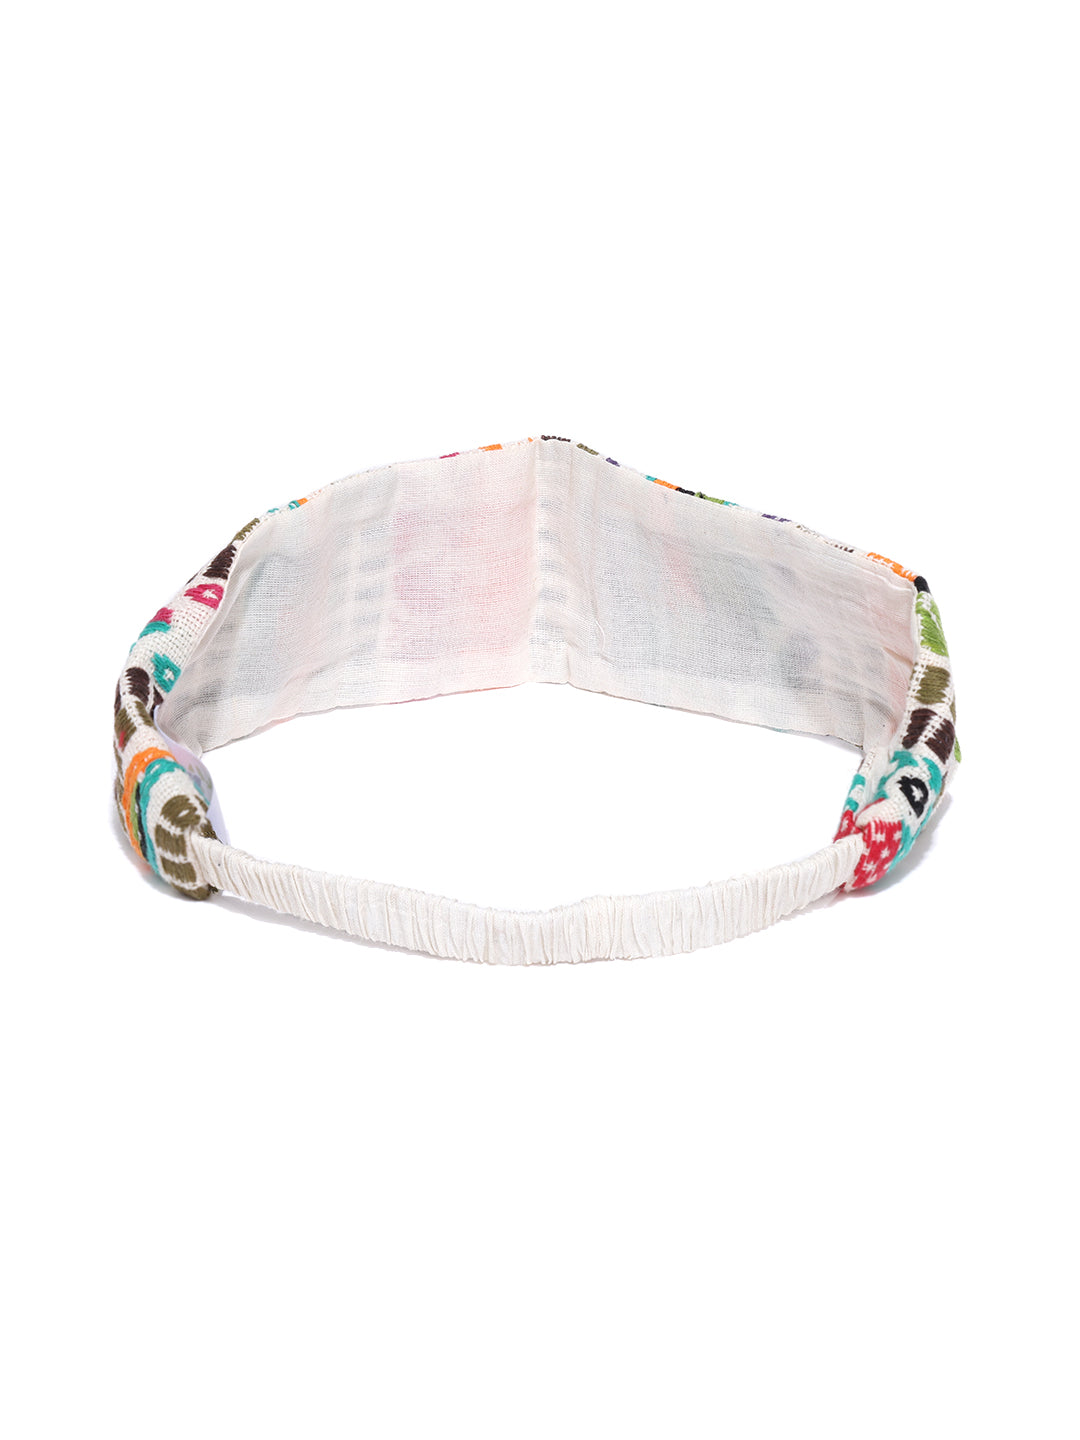 Blueberry multi color embroidery hairband